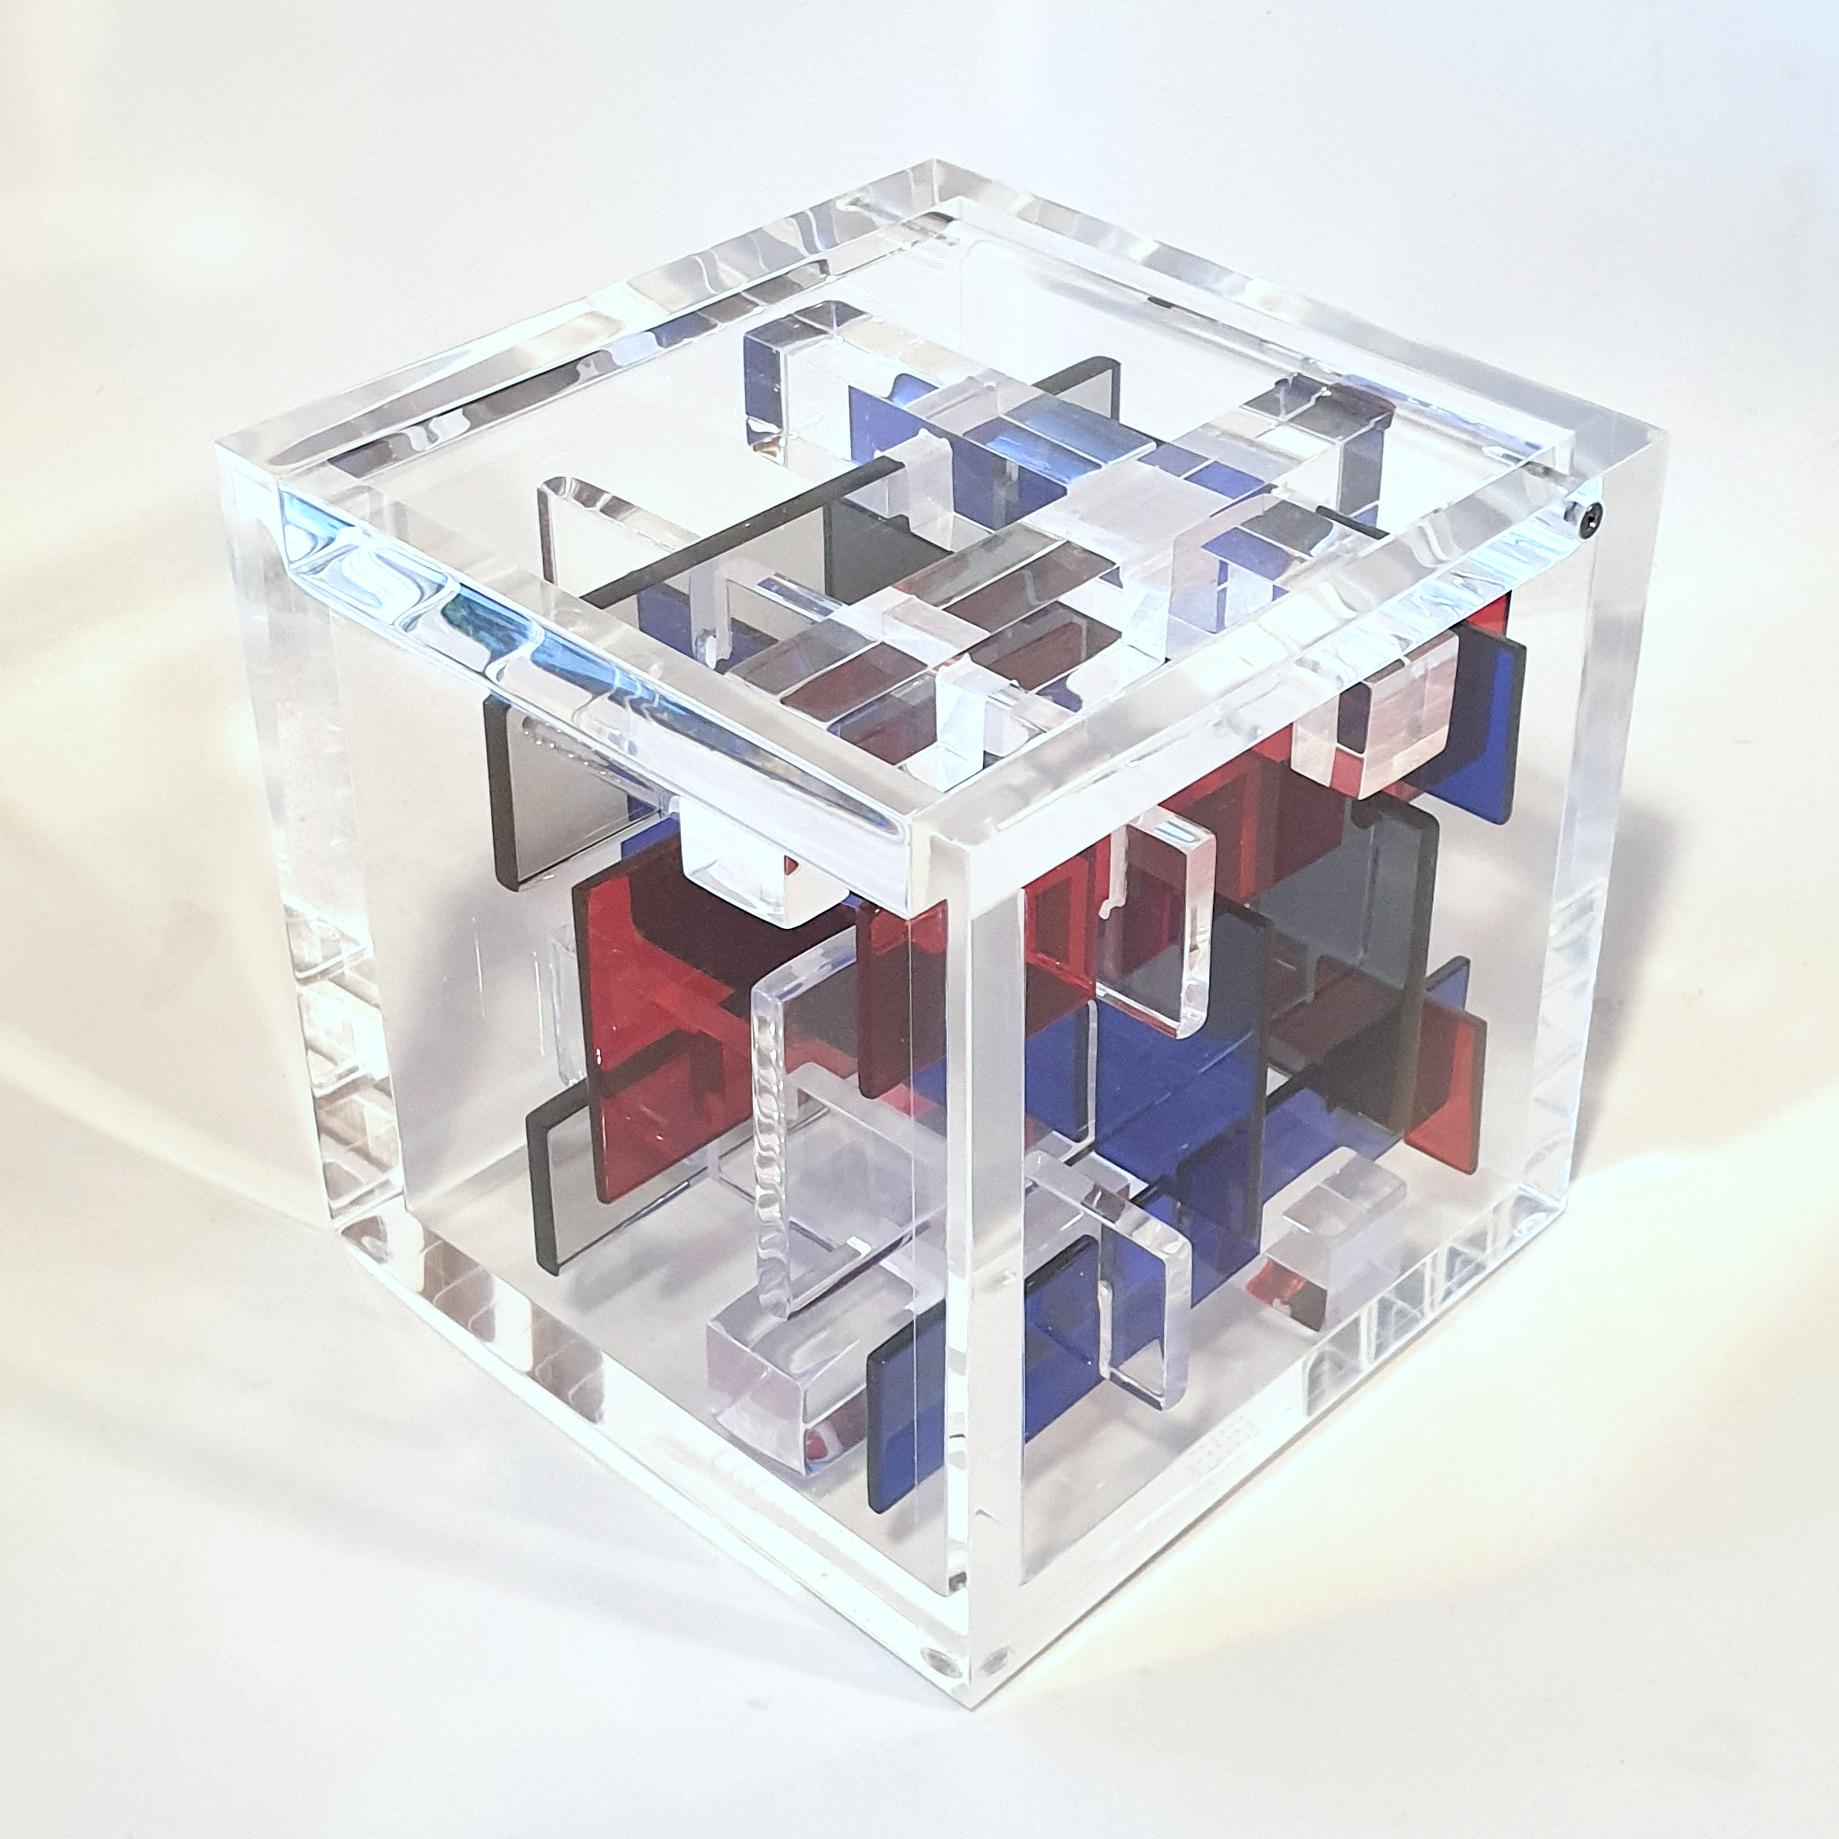 Composition BRGT - contemporary modern abstract geometric cube sculpture - Abstract Geometric Sculpture by Haringa + Olijve